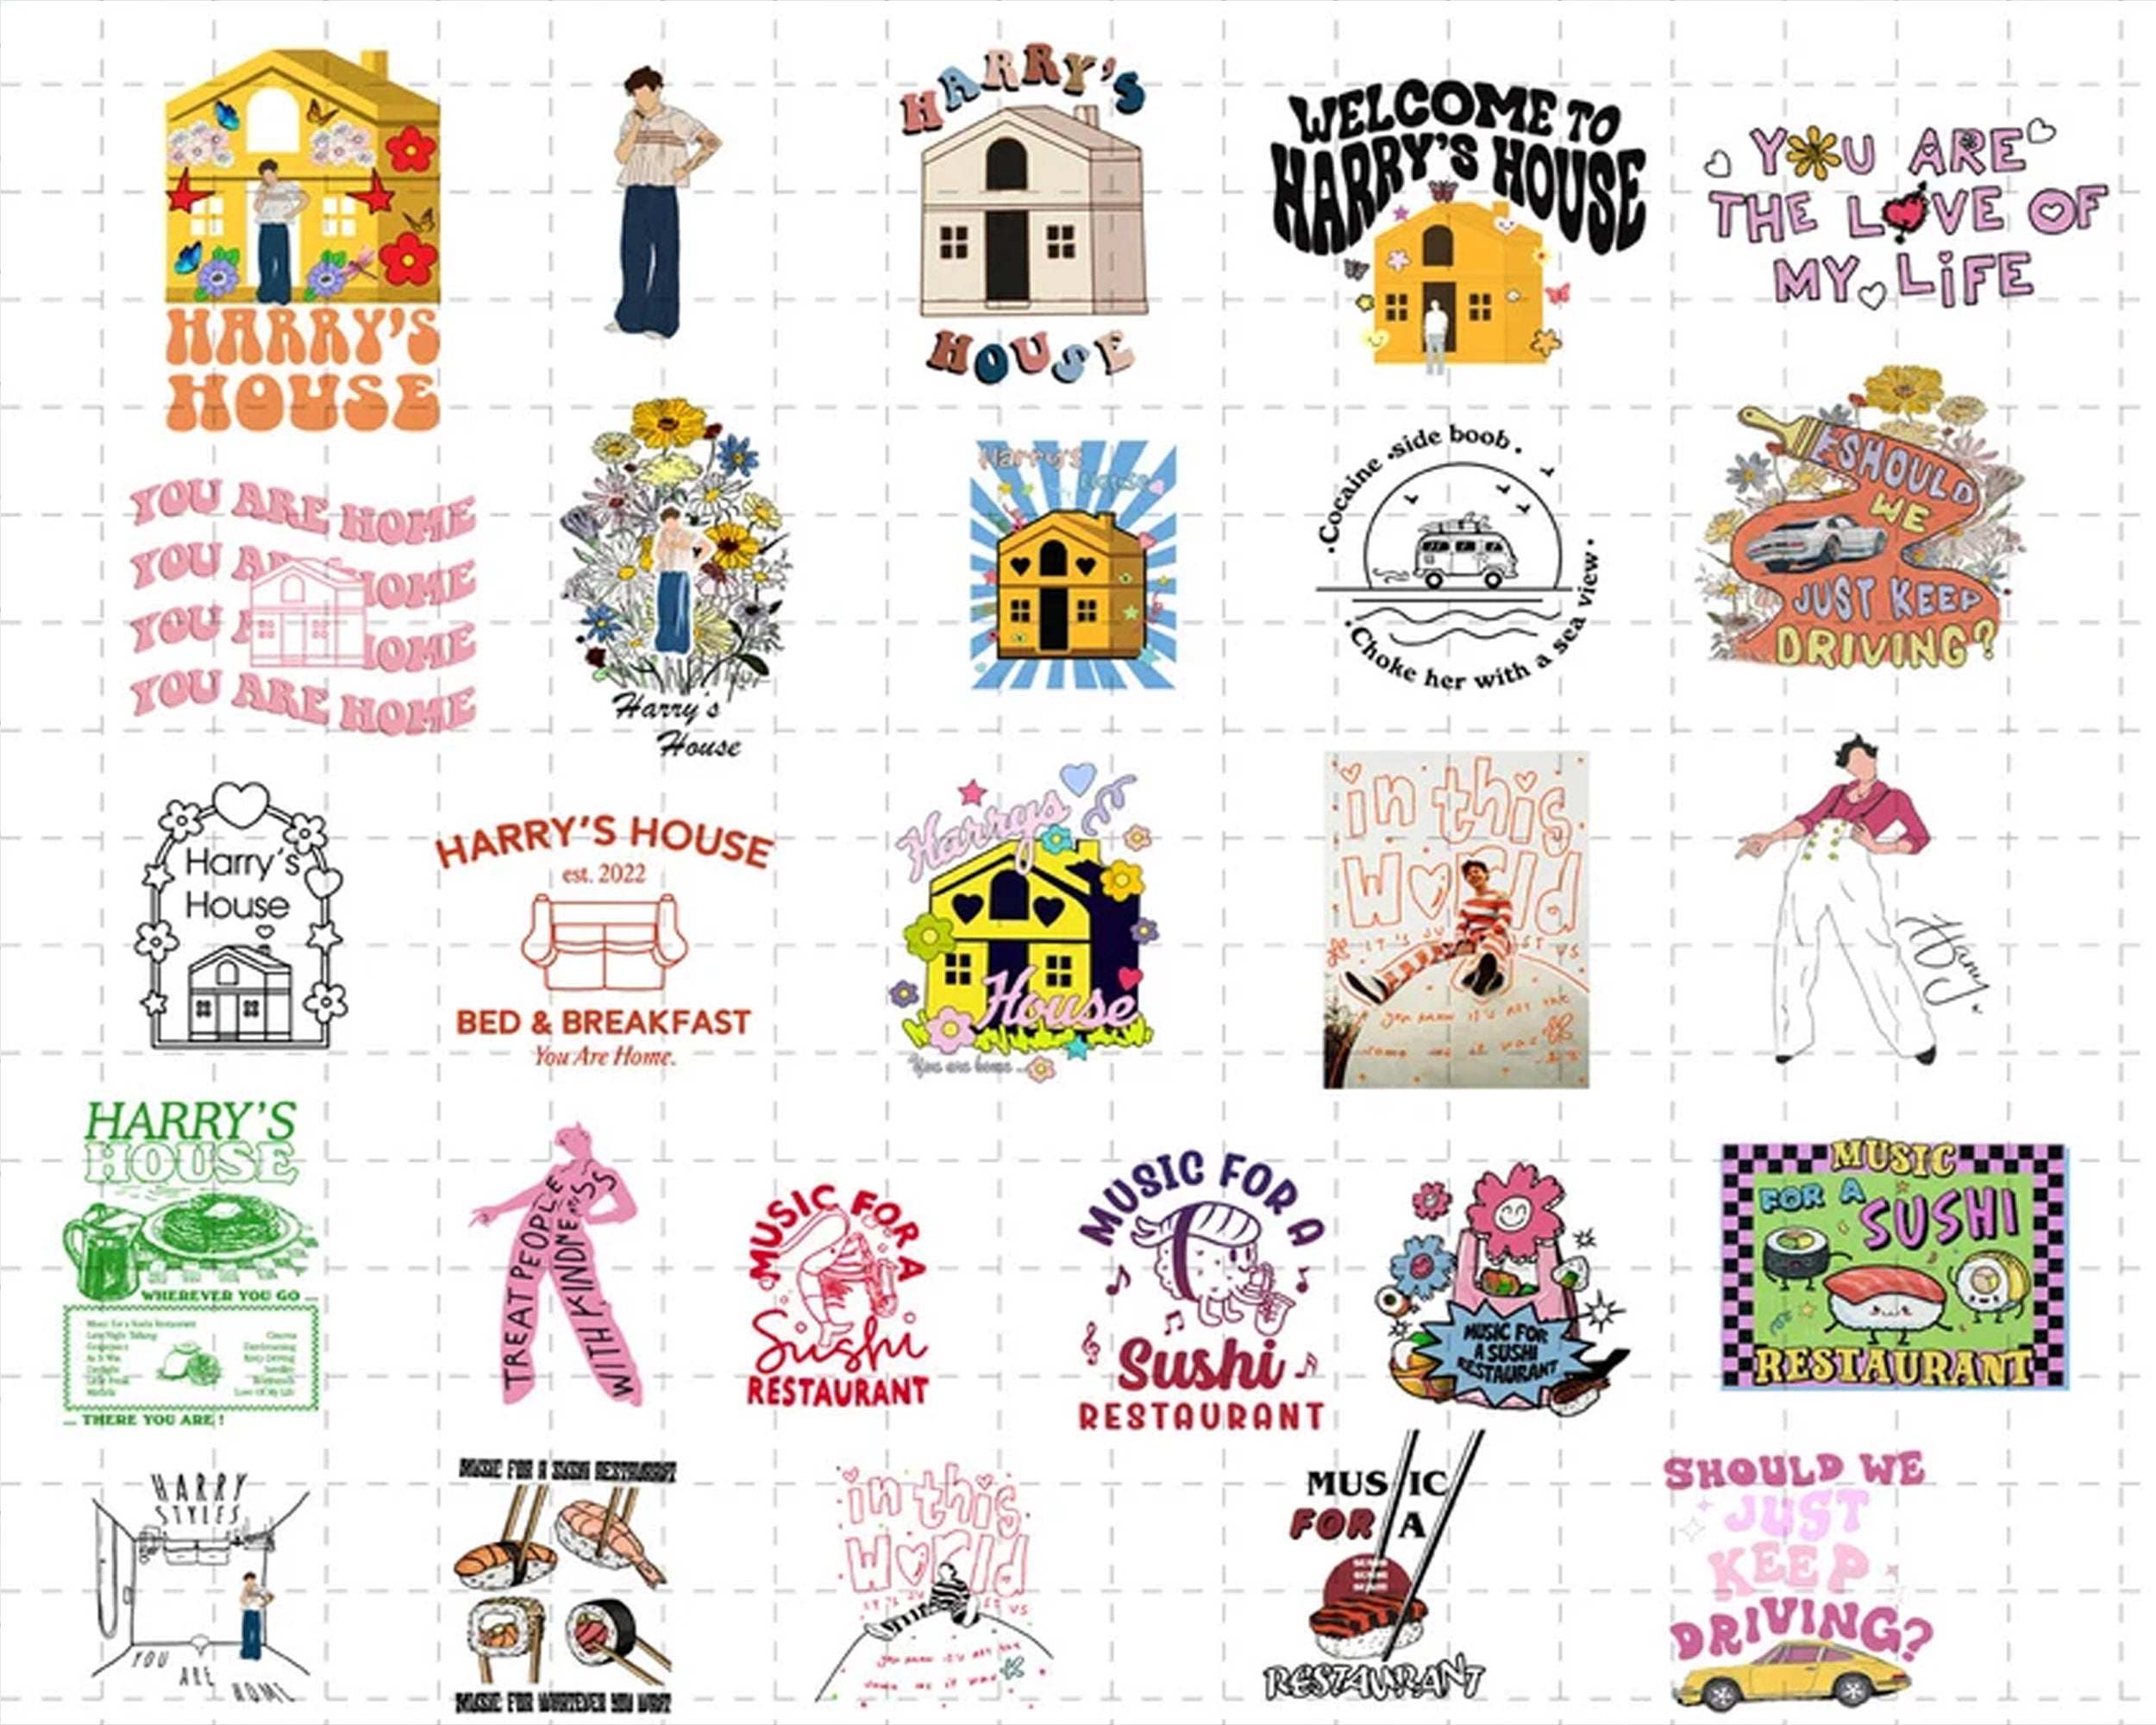 25 + Harry House Png Designs, Harry’s House You Are Home, Harry Style Design, Png Bundle, Digital Download, Harry's House Album